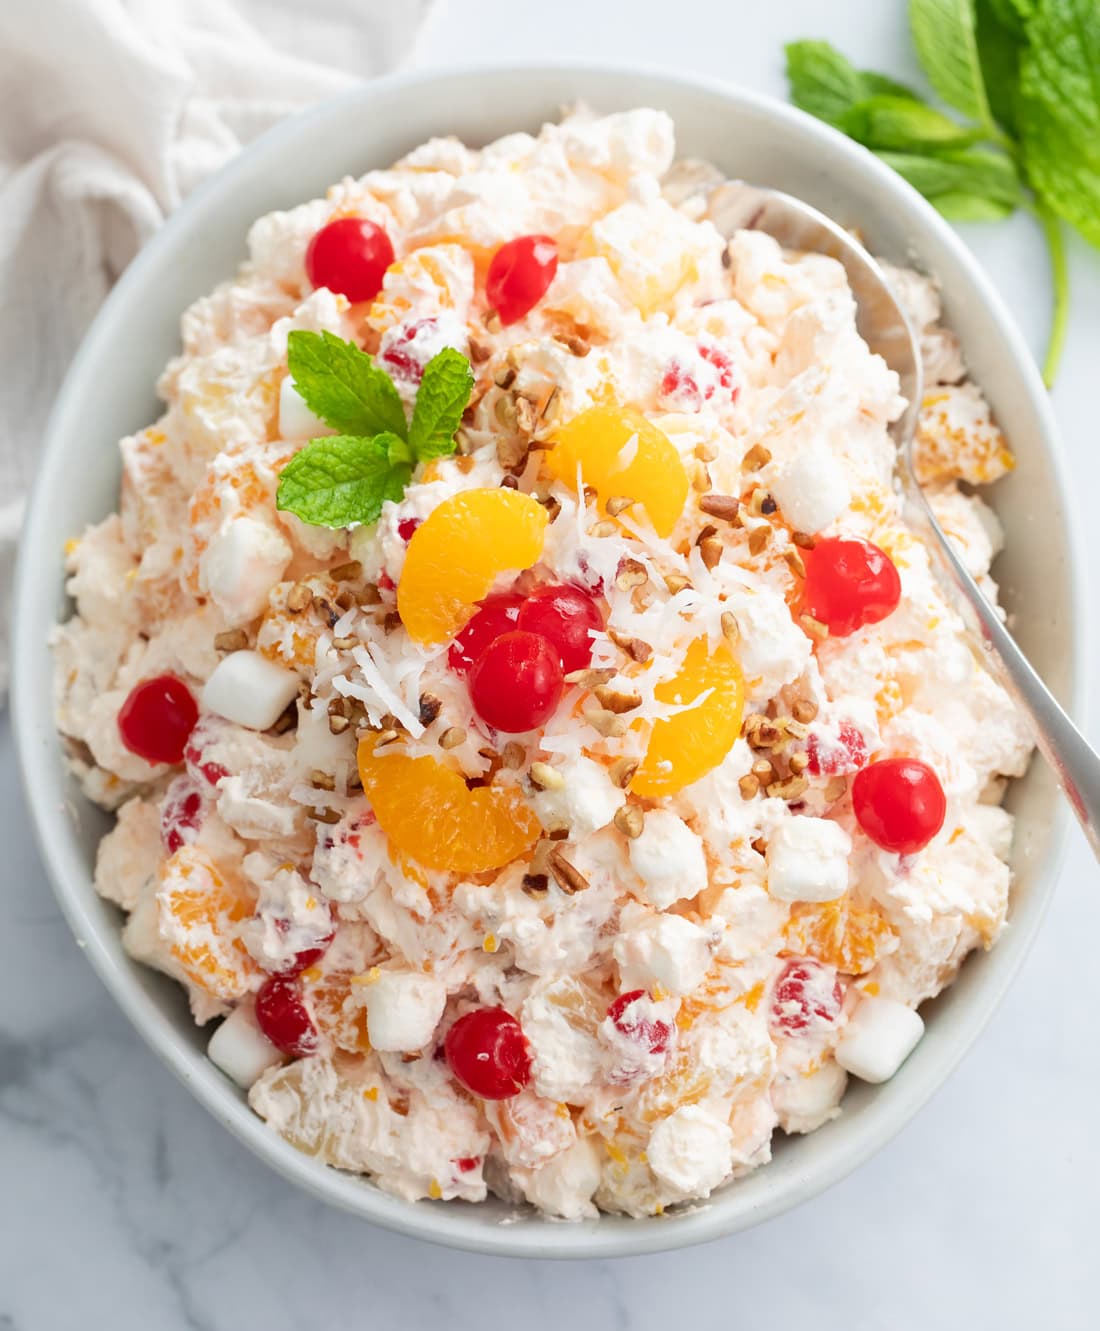 Ambrosia Salad in a white bowl with cherries, mandarin oranges, and fresh mint on top.